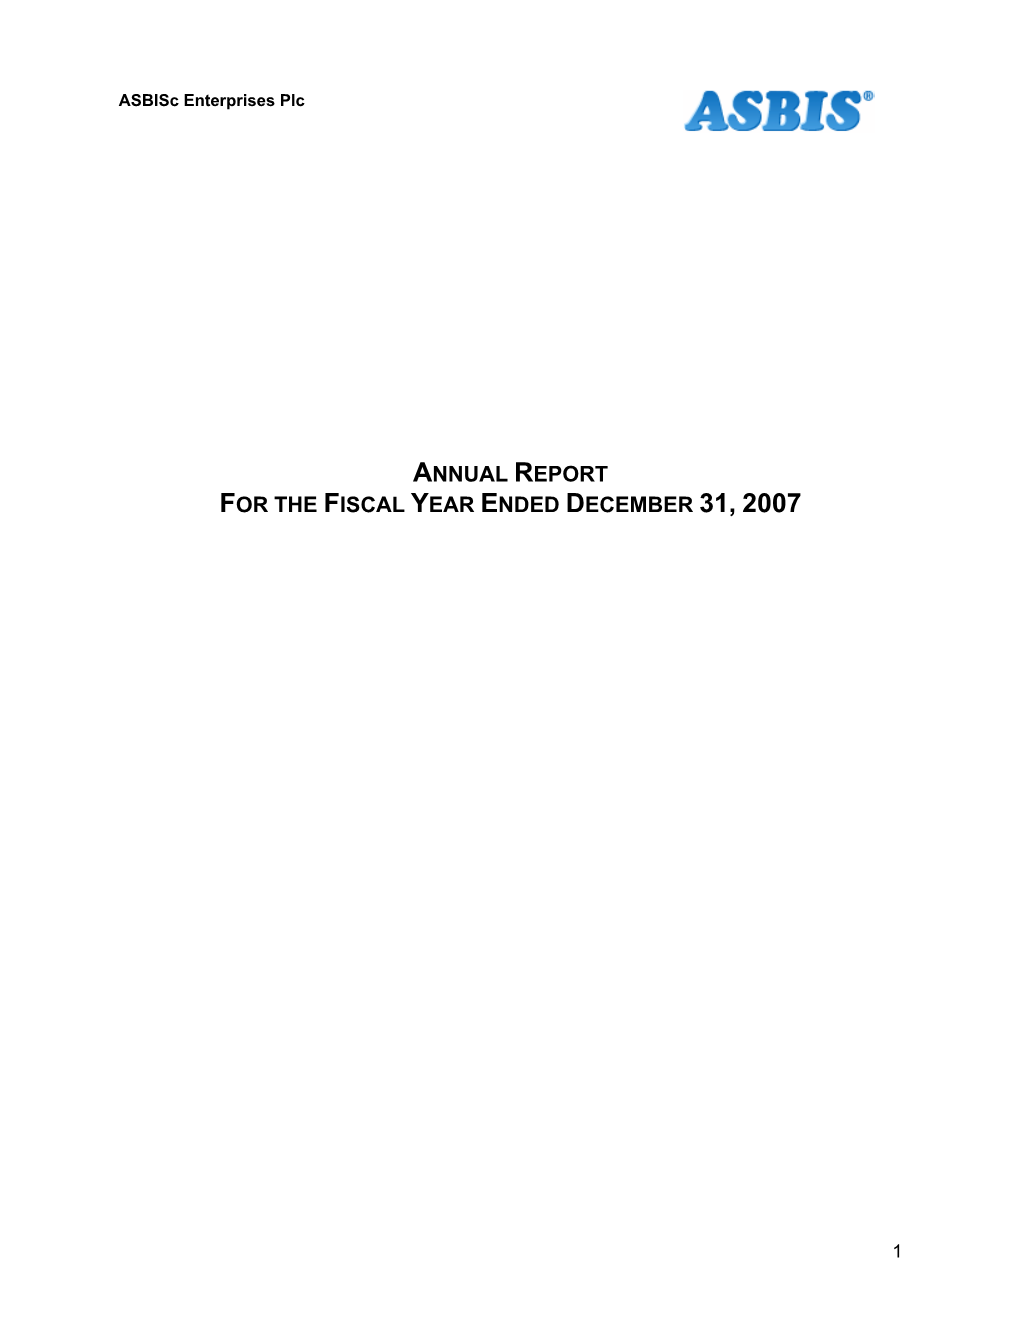 Annual Report for the Fiscal Year Ended December 31, 2007